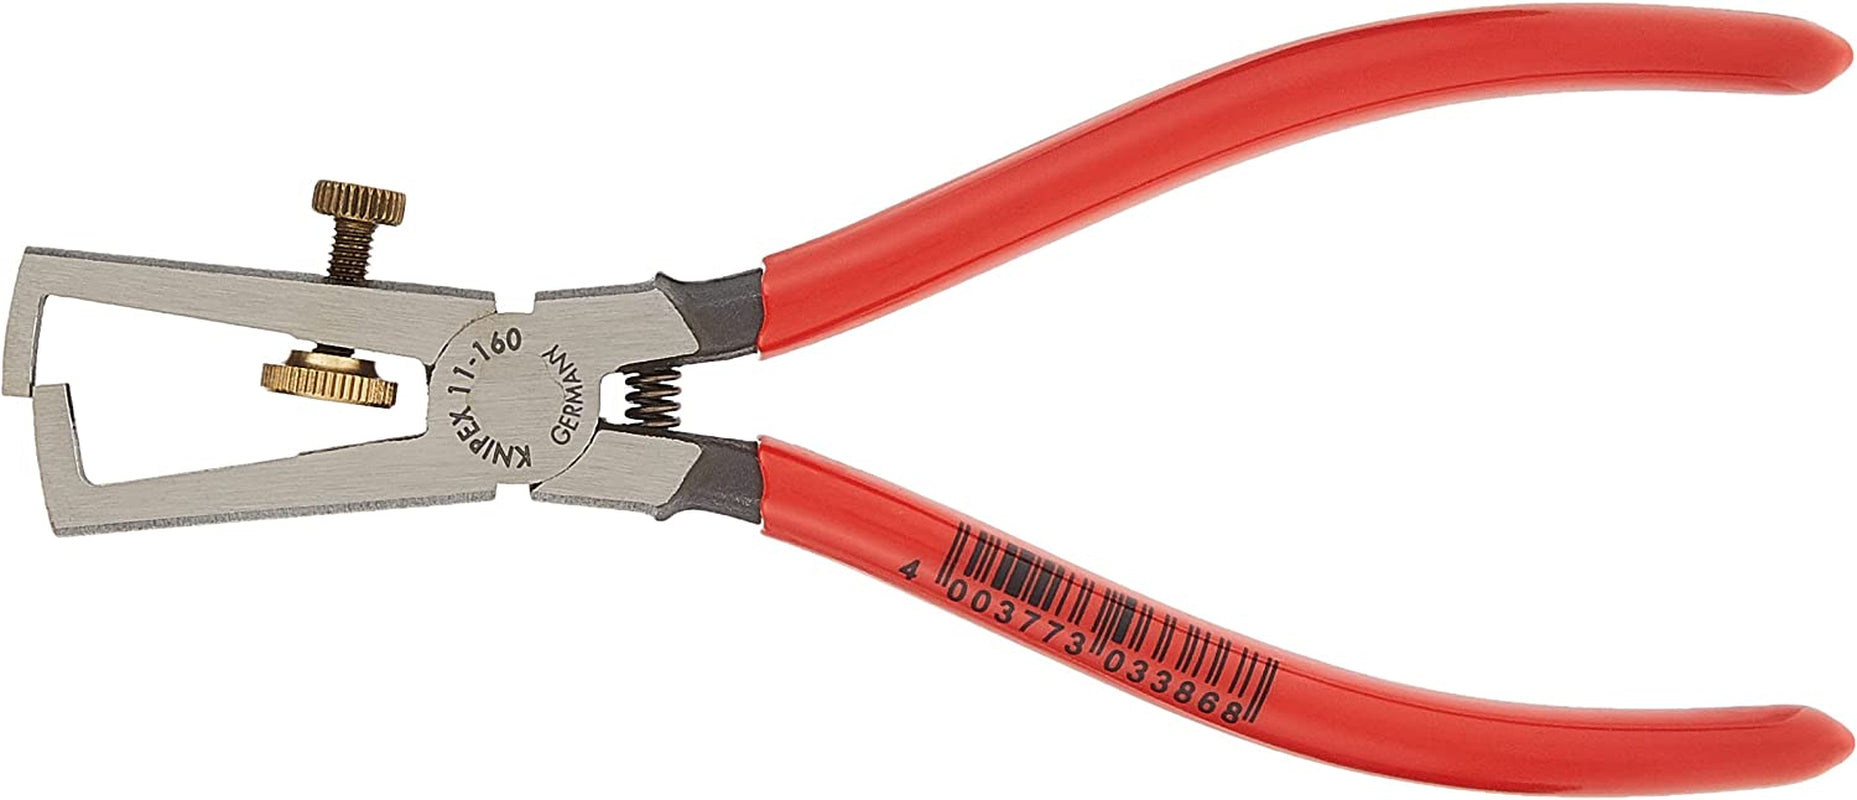 KNIPEX Tools, Knipex 1101160 End-Type Wire Strippers, 6.25 Inch